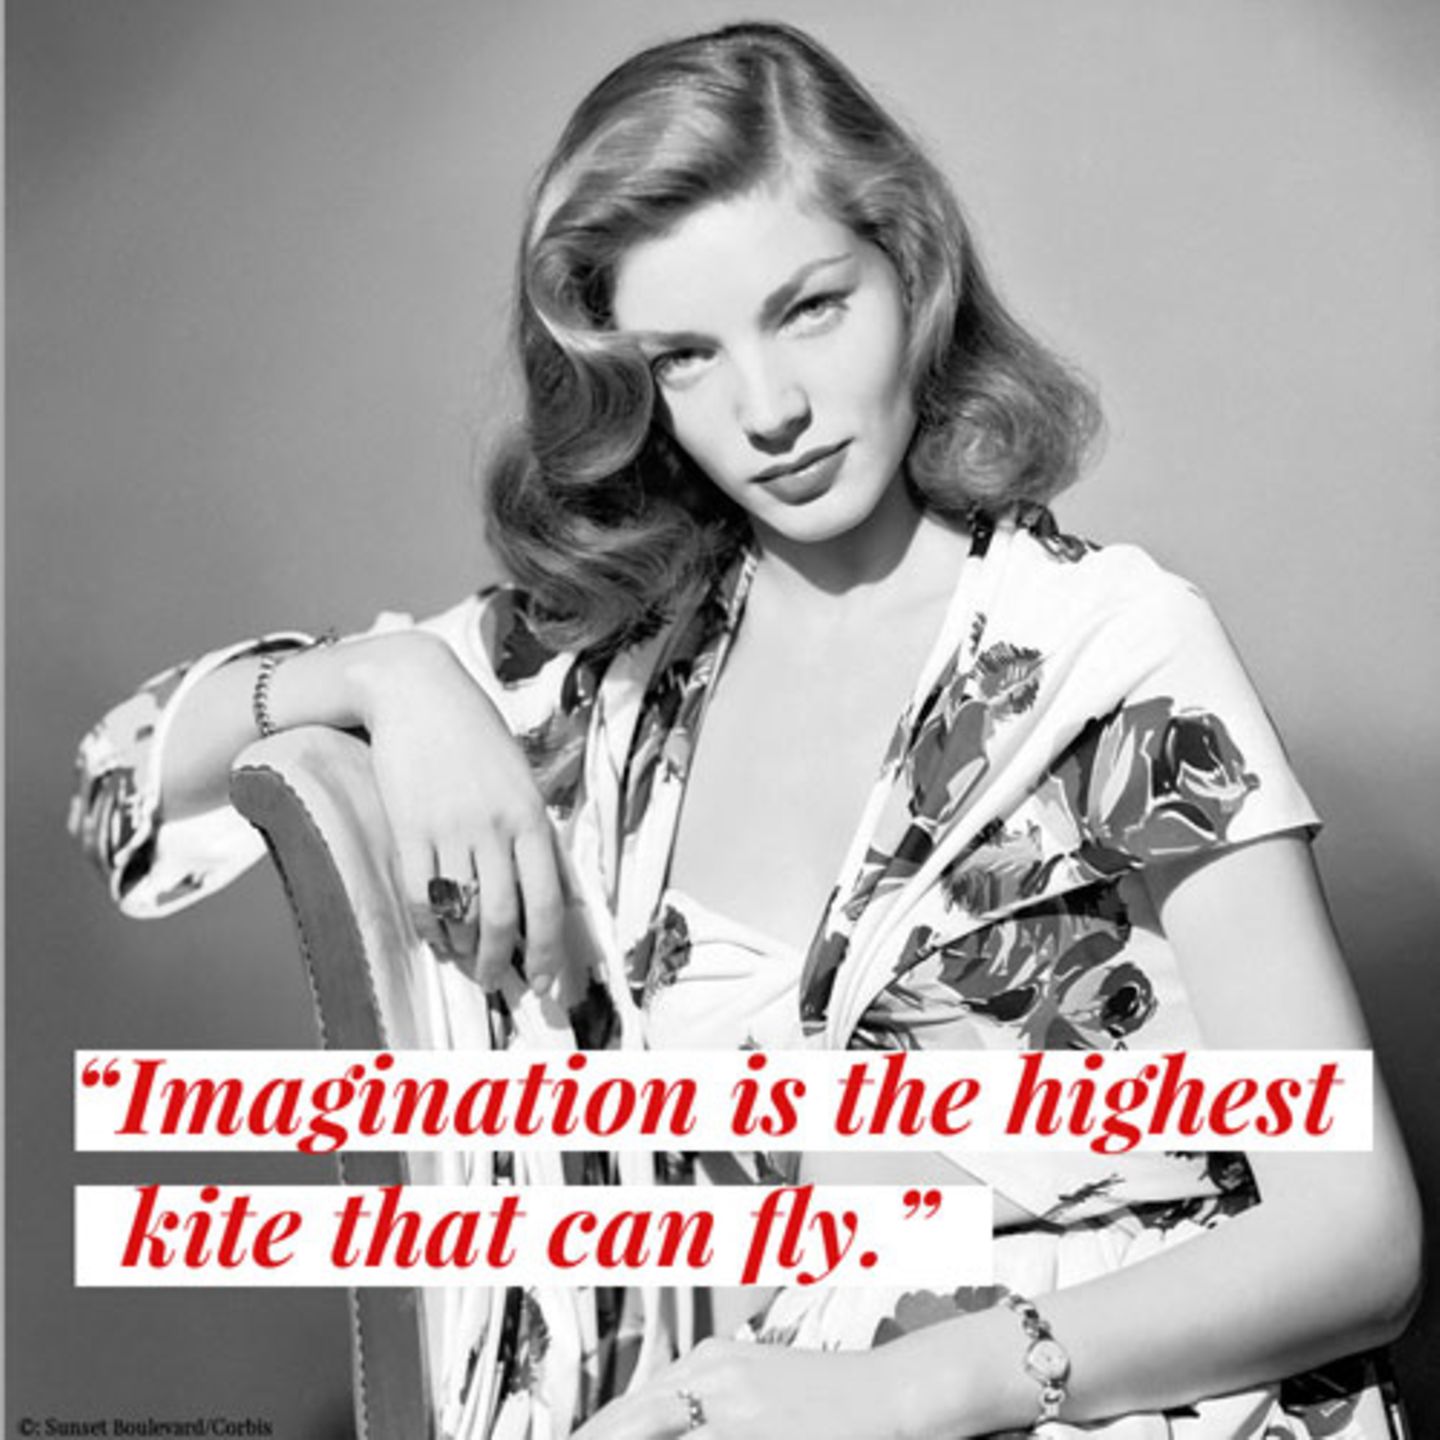 Imagination is the highest kite that can fly.